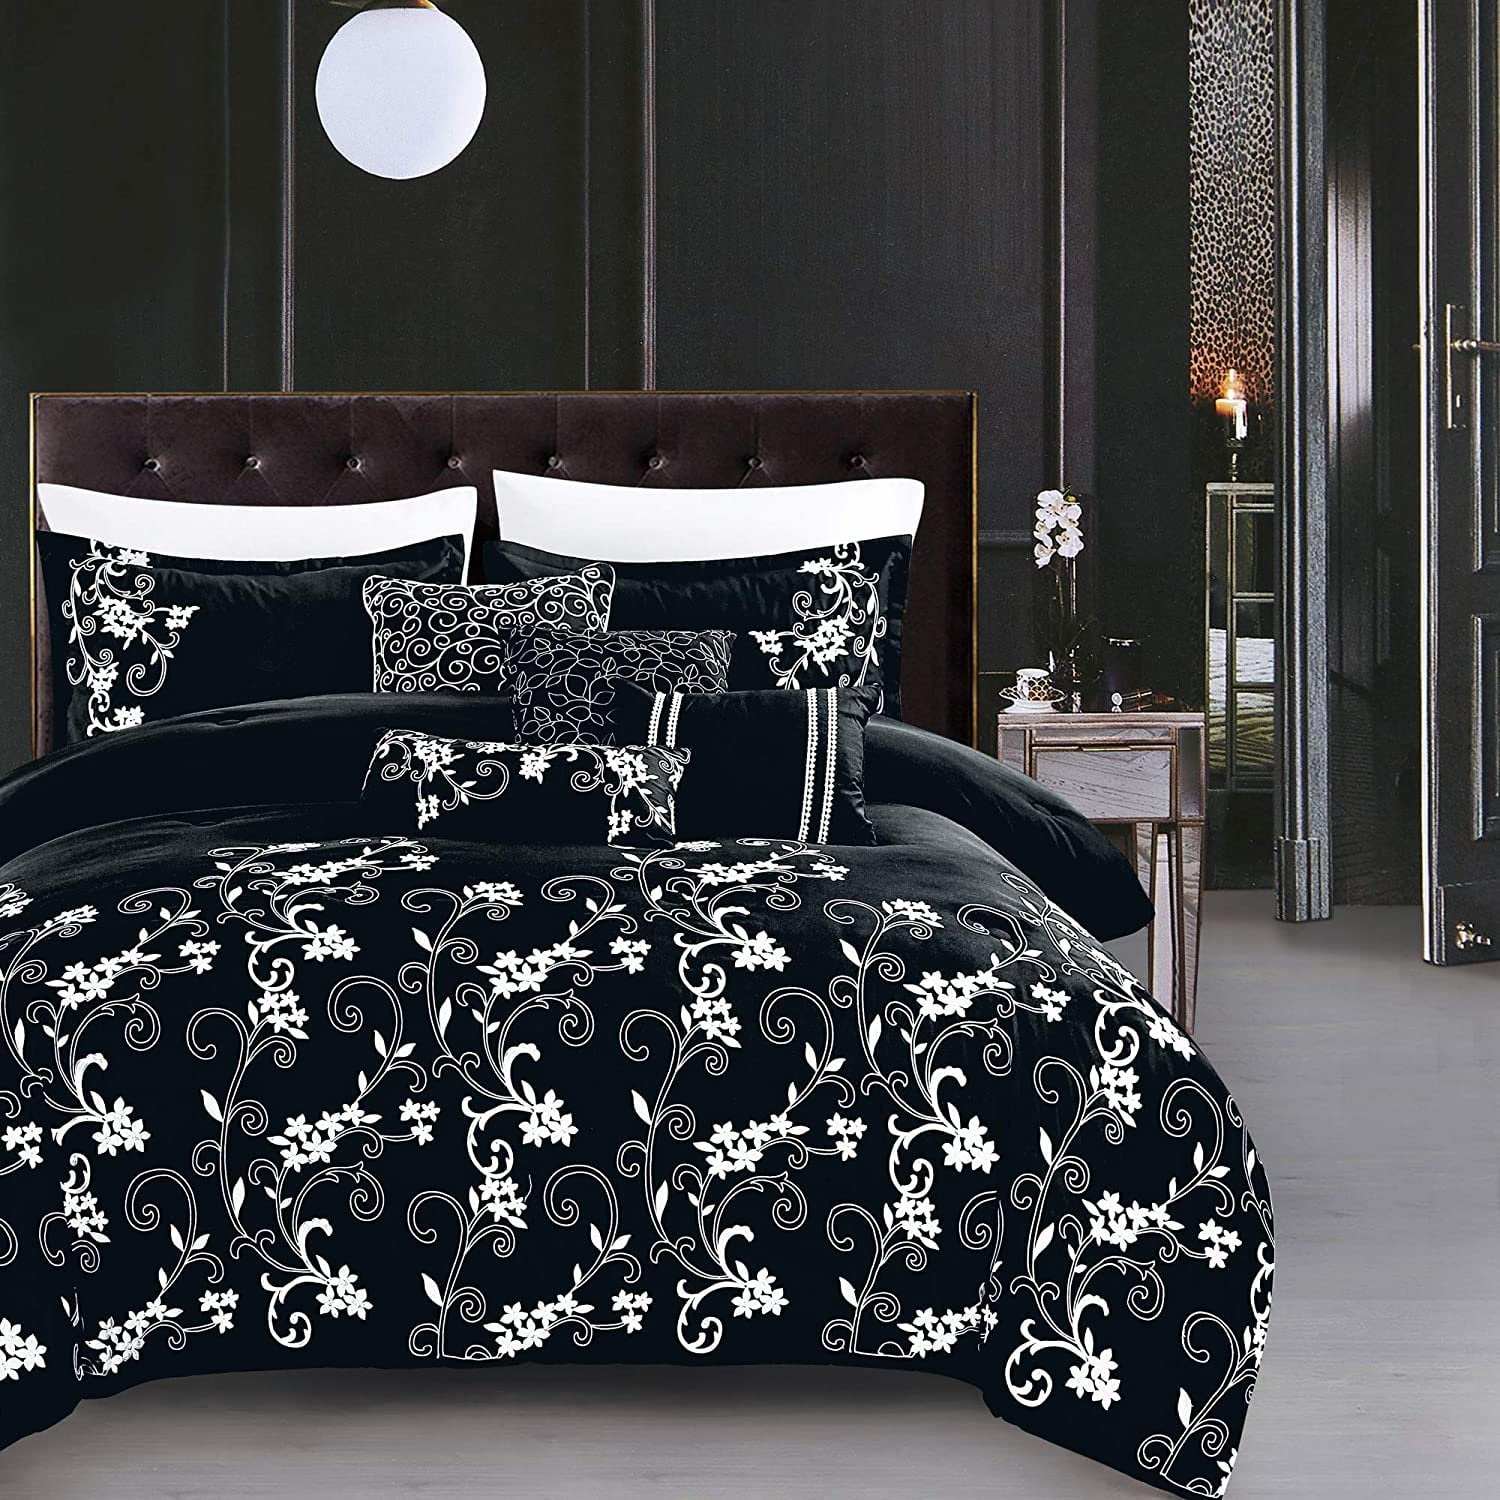 Sapphire Home Luxury 7 Piece Fullqueen Comforter Set With Shams Cushions Unique Black White 